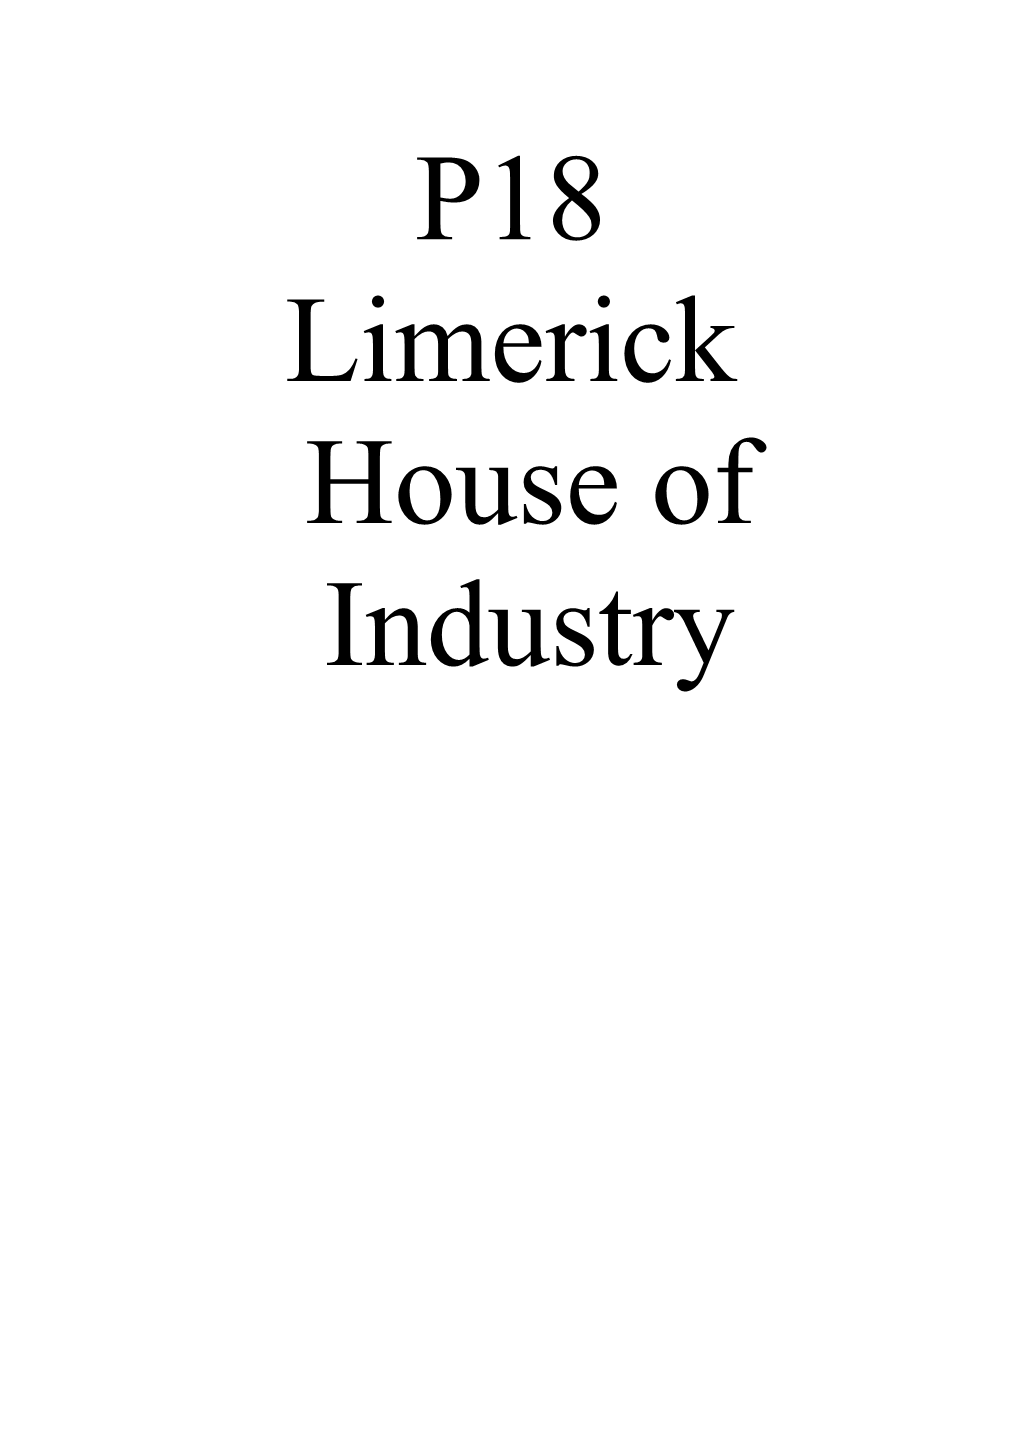 Limerick House of Industryintroduction